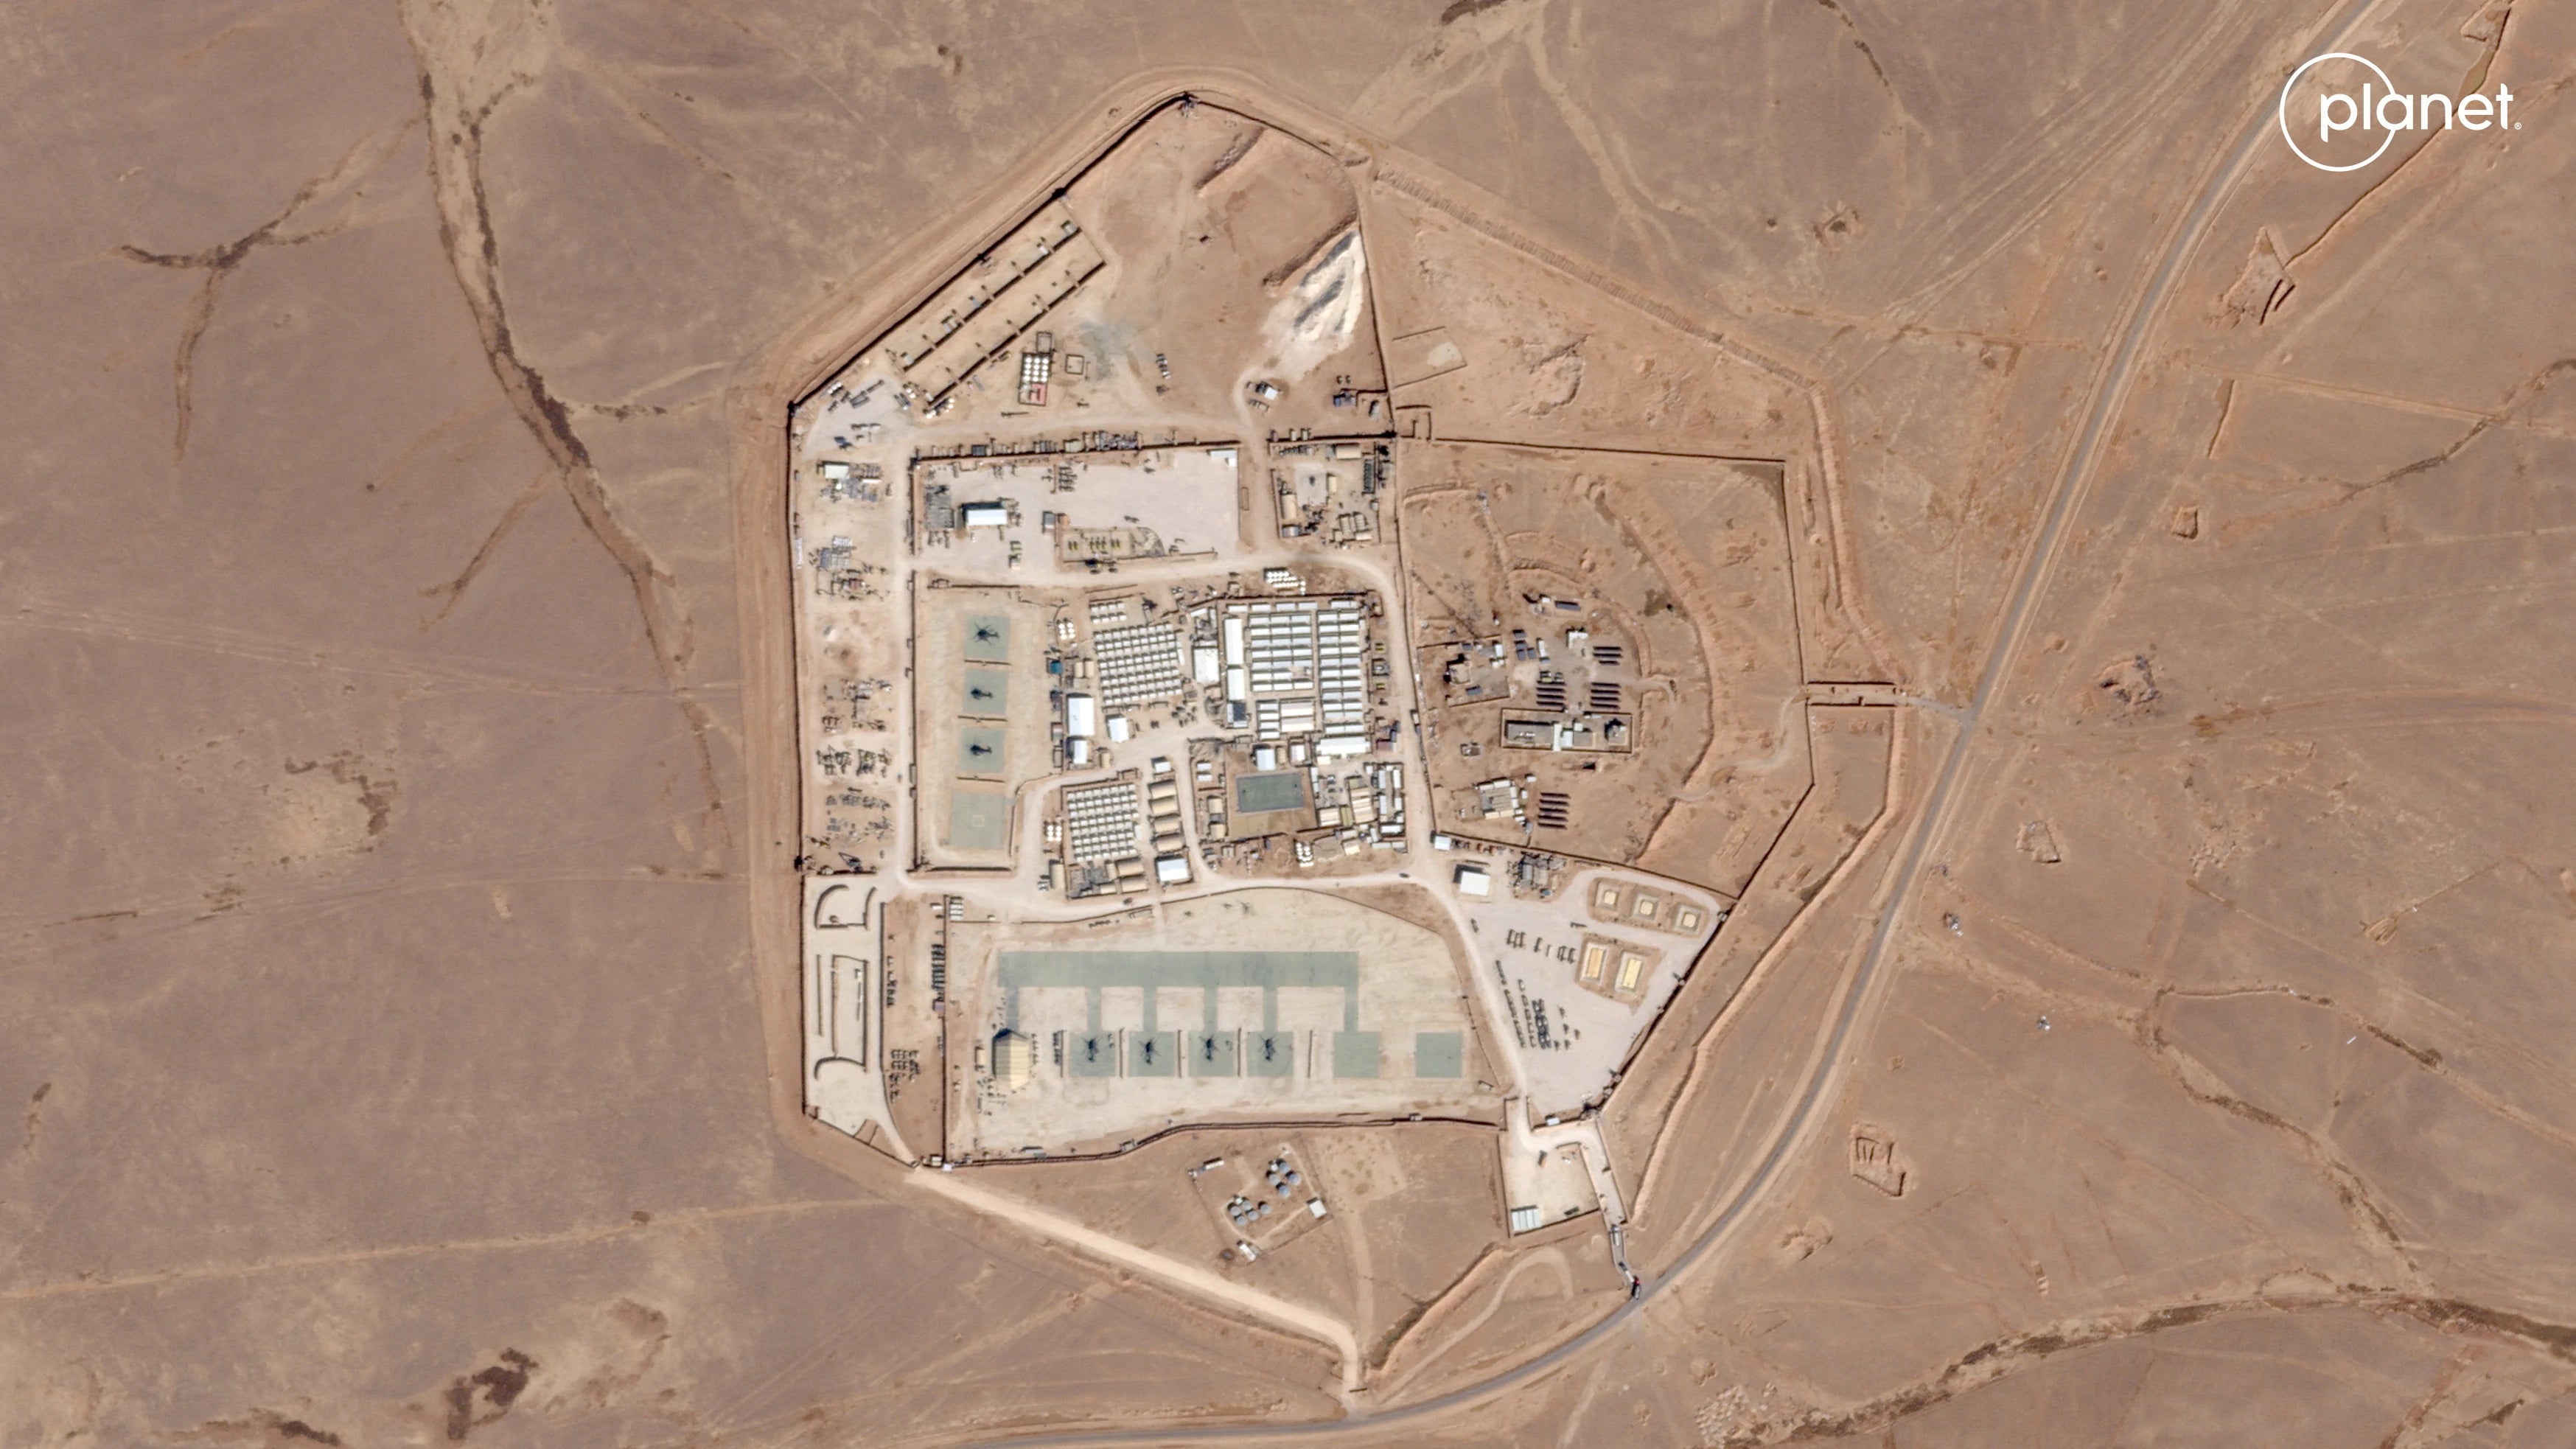 FILE PHOTO: Satellite view of the US military outpost known as Tower 22, in Rukban, Rwaished District, Jordan